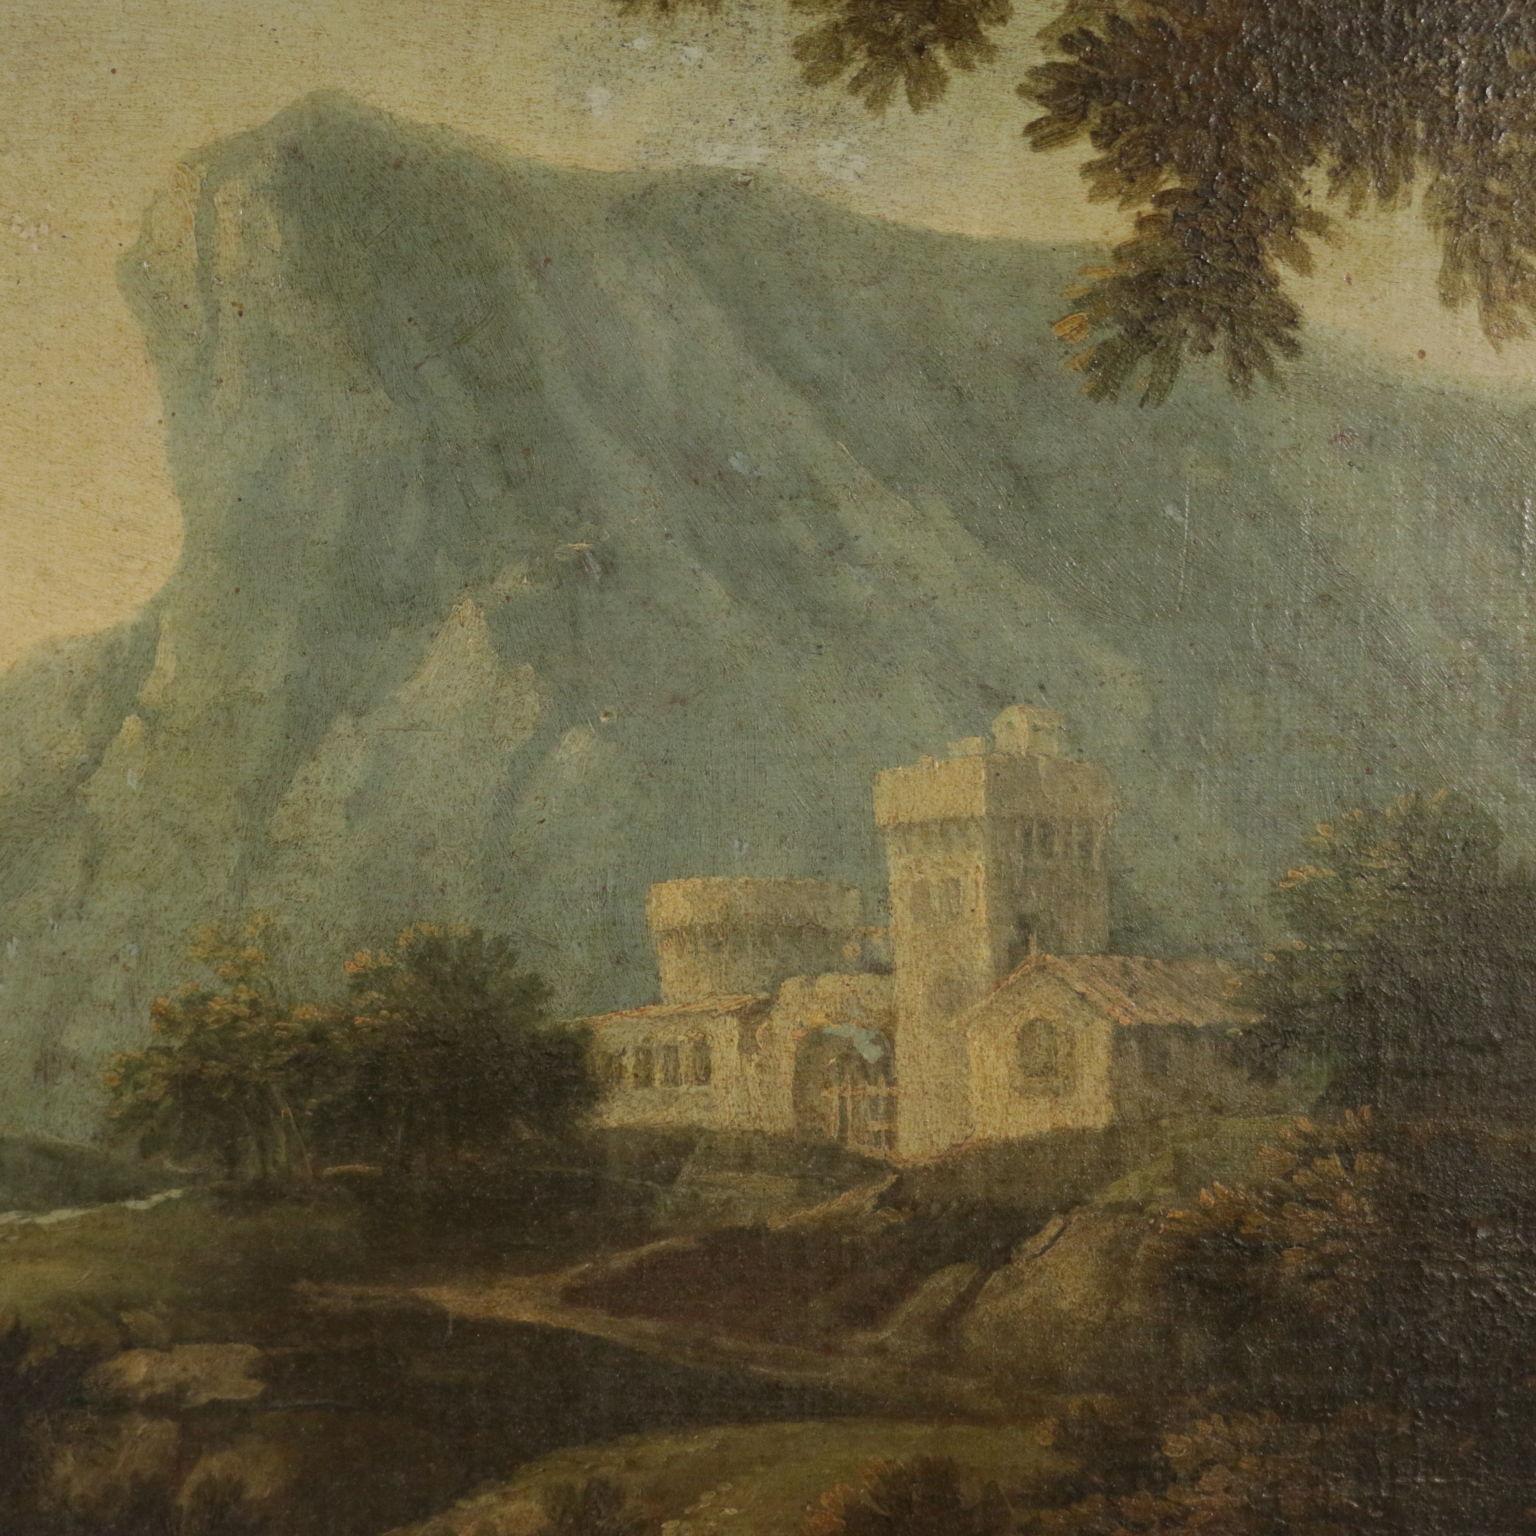 Landscape with Figures and Buildings Oil on Canvas 18th Century 2